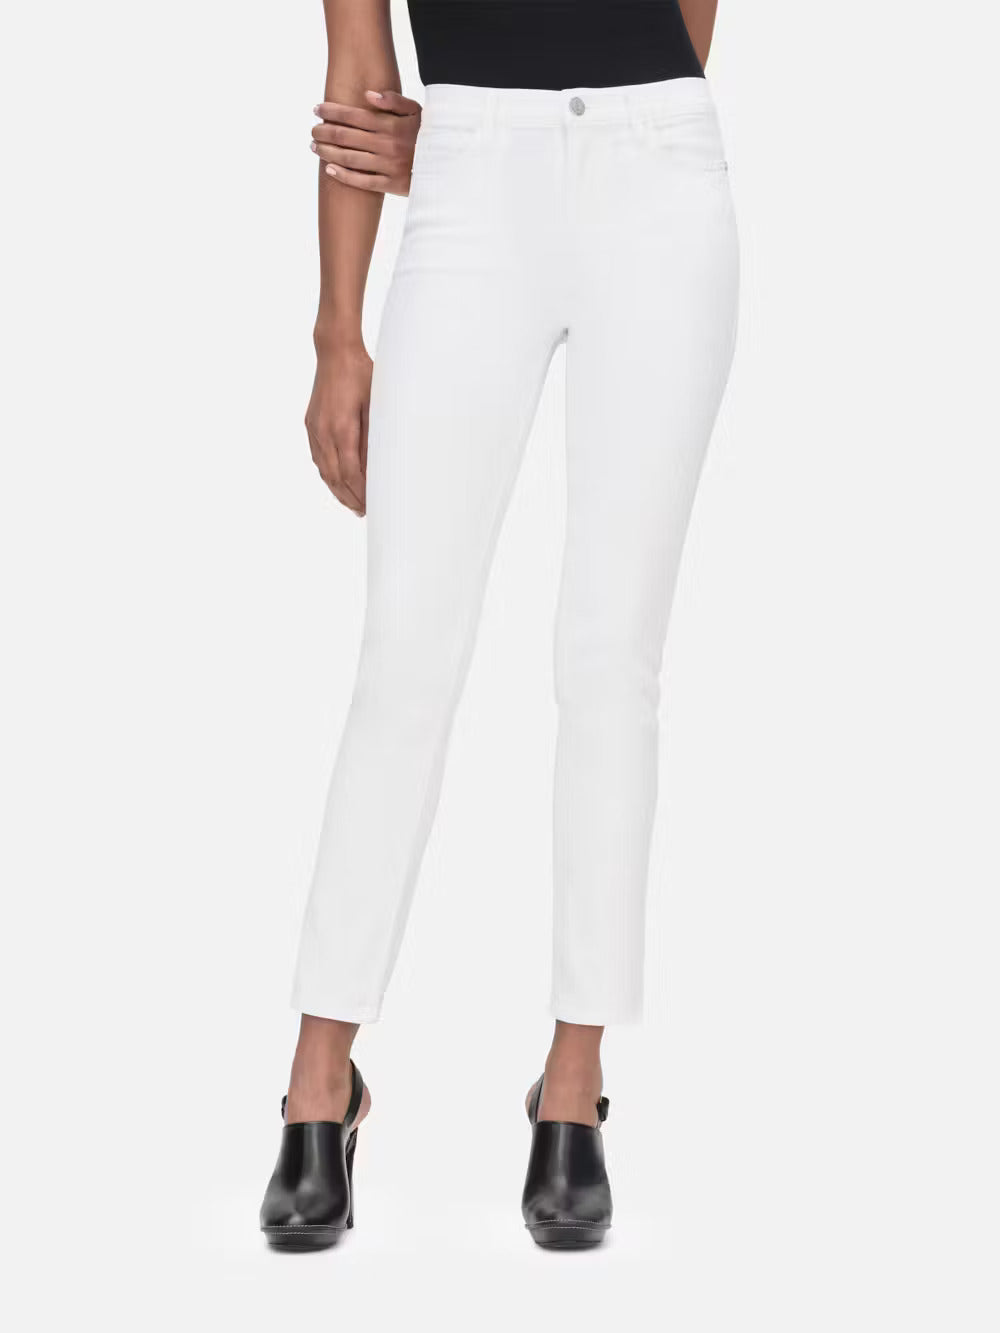 A woman wearing Frame's Le High Straight - Blanc denim jeans and a tailored black top.